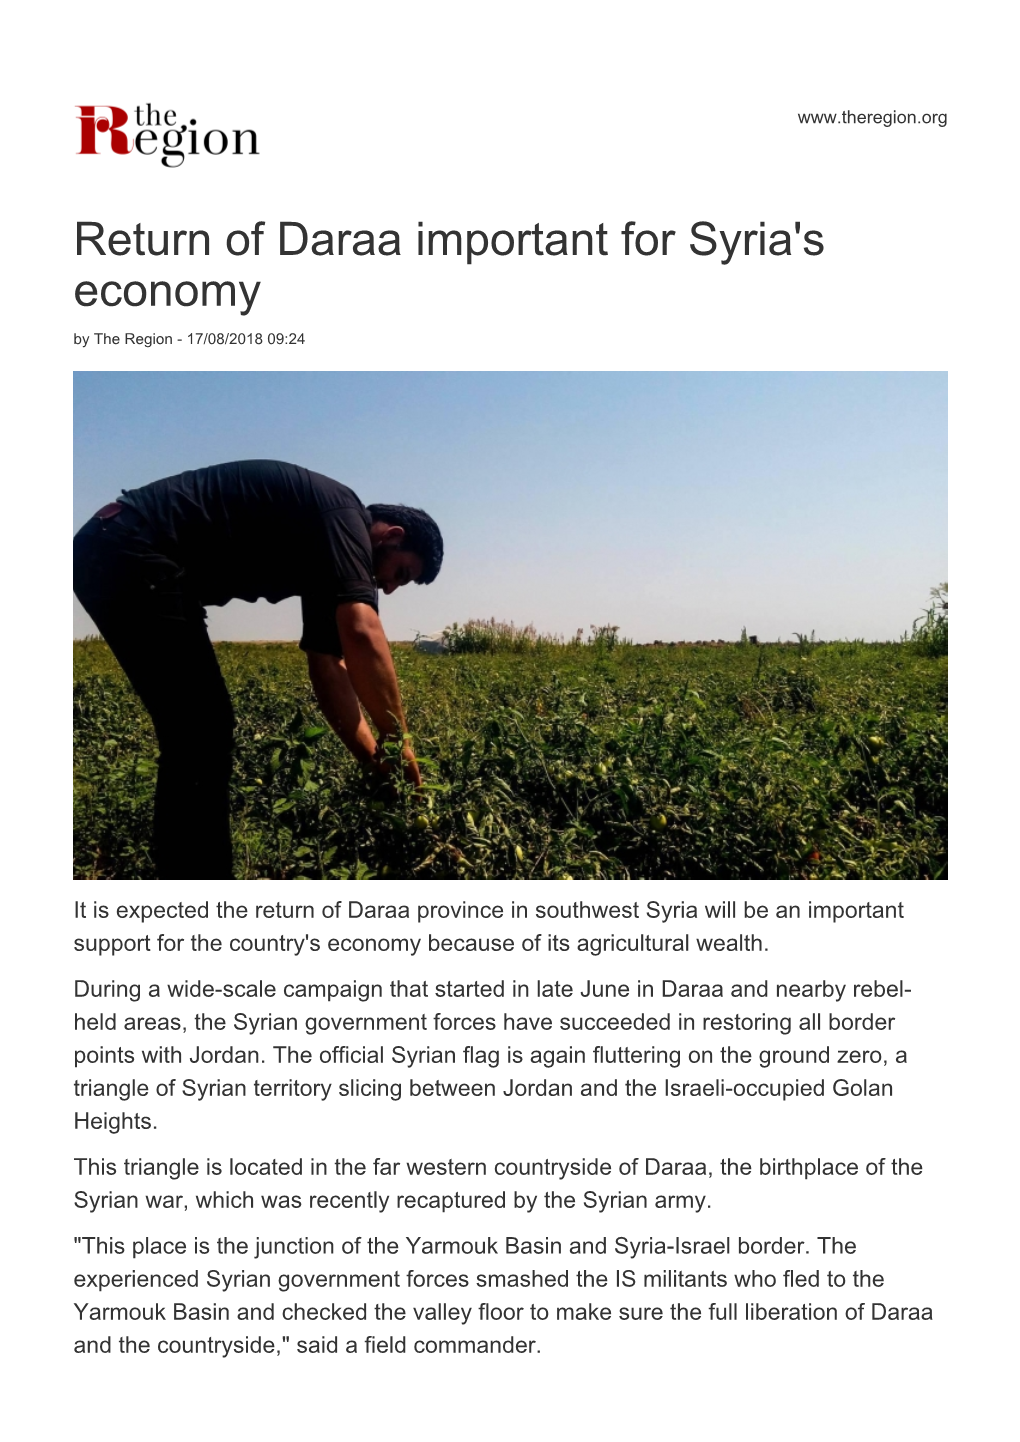 Return of Daraa Important for Syria's Economy by the Region - 17/08/2018 09:24